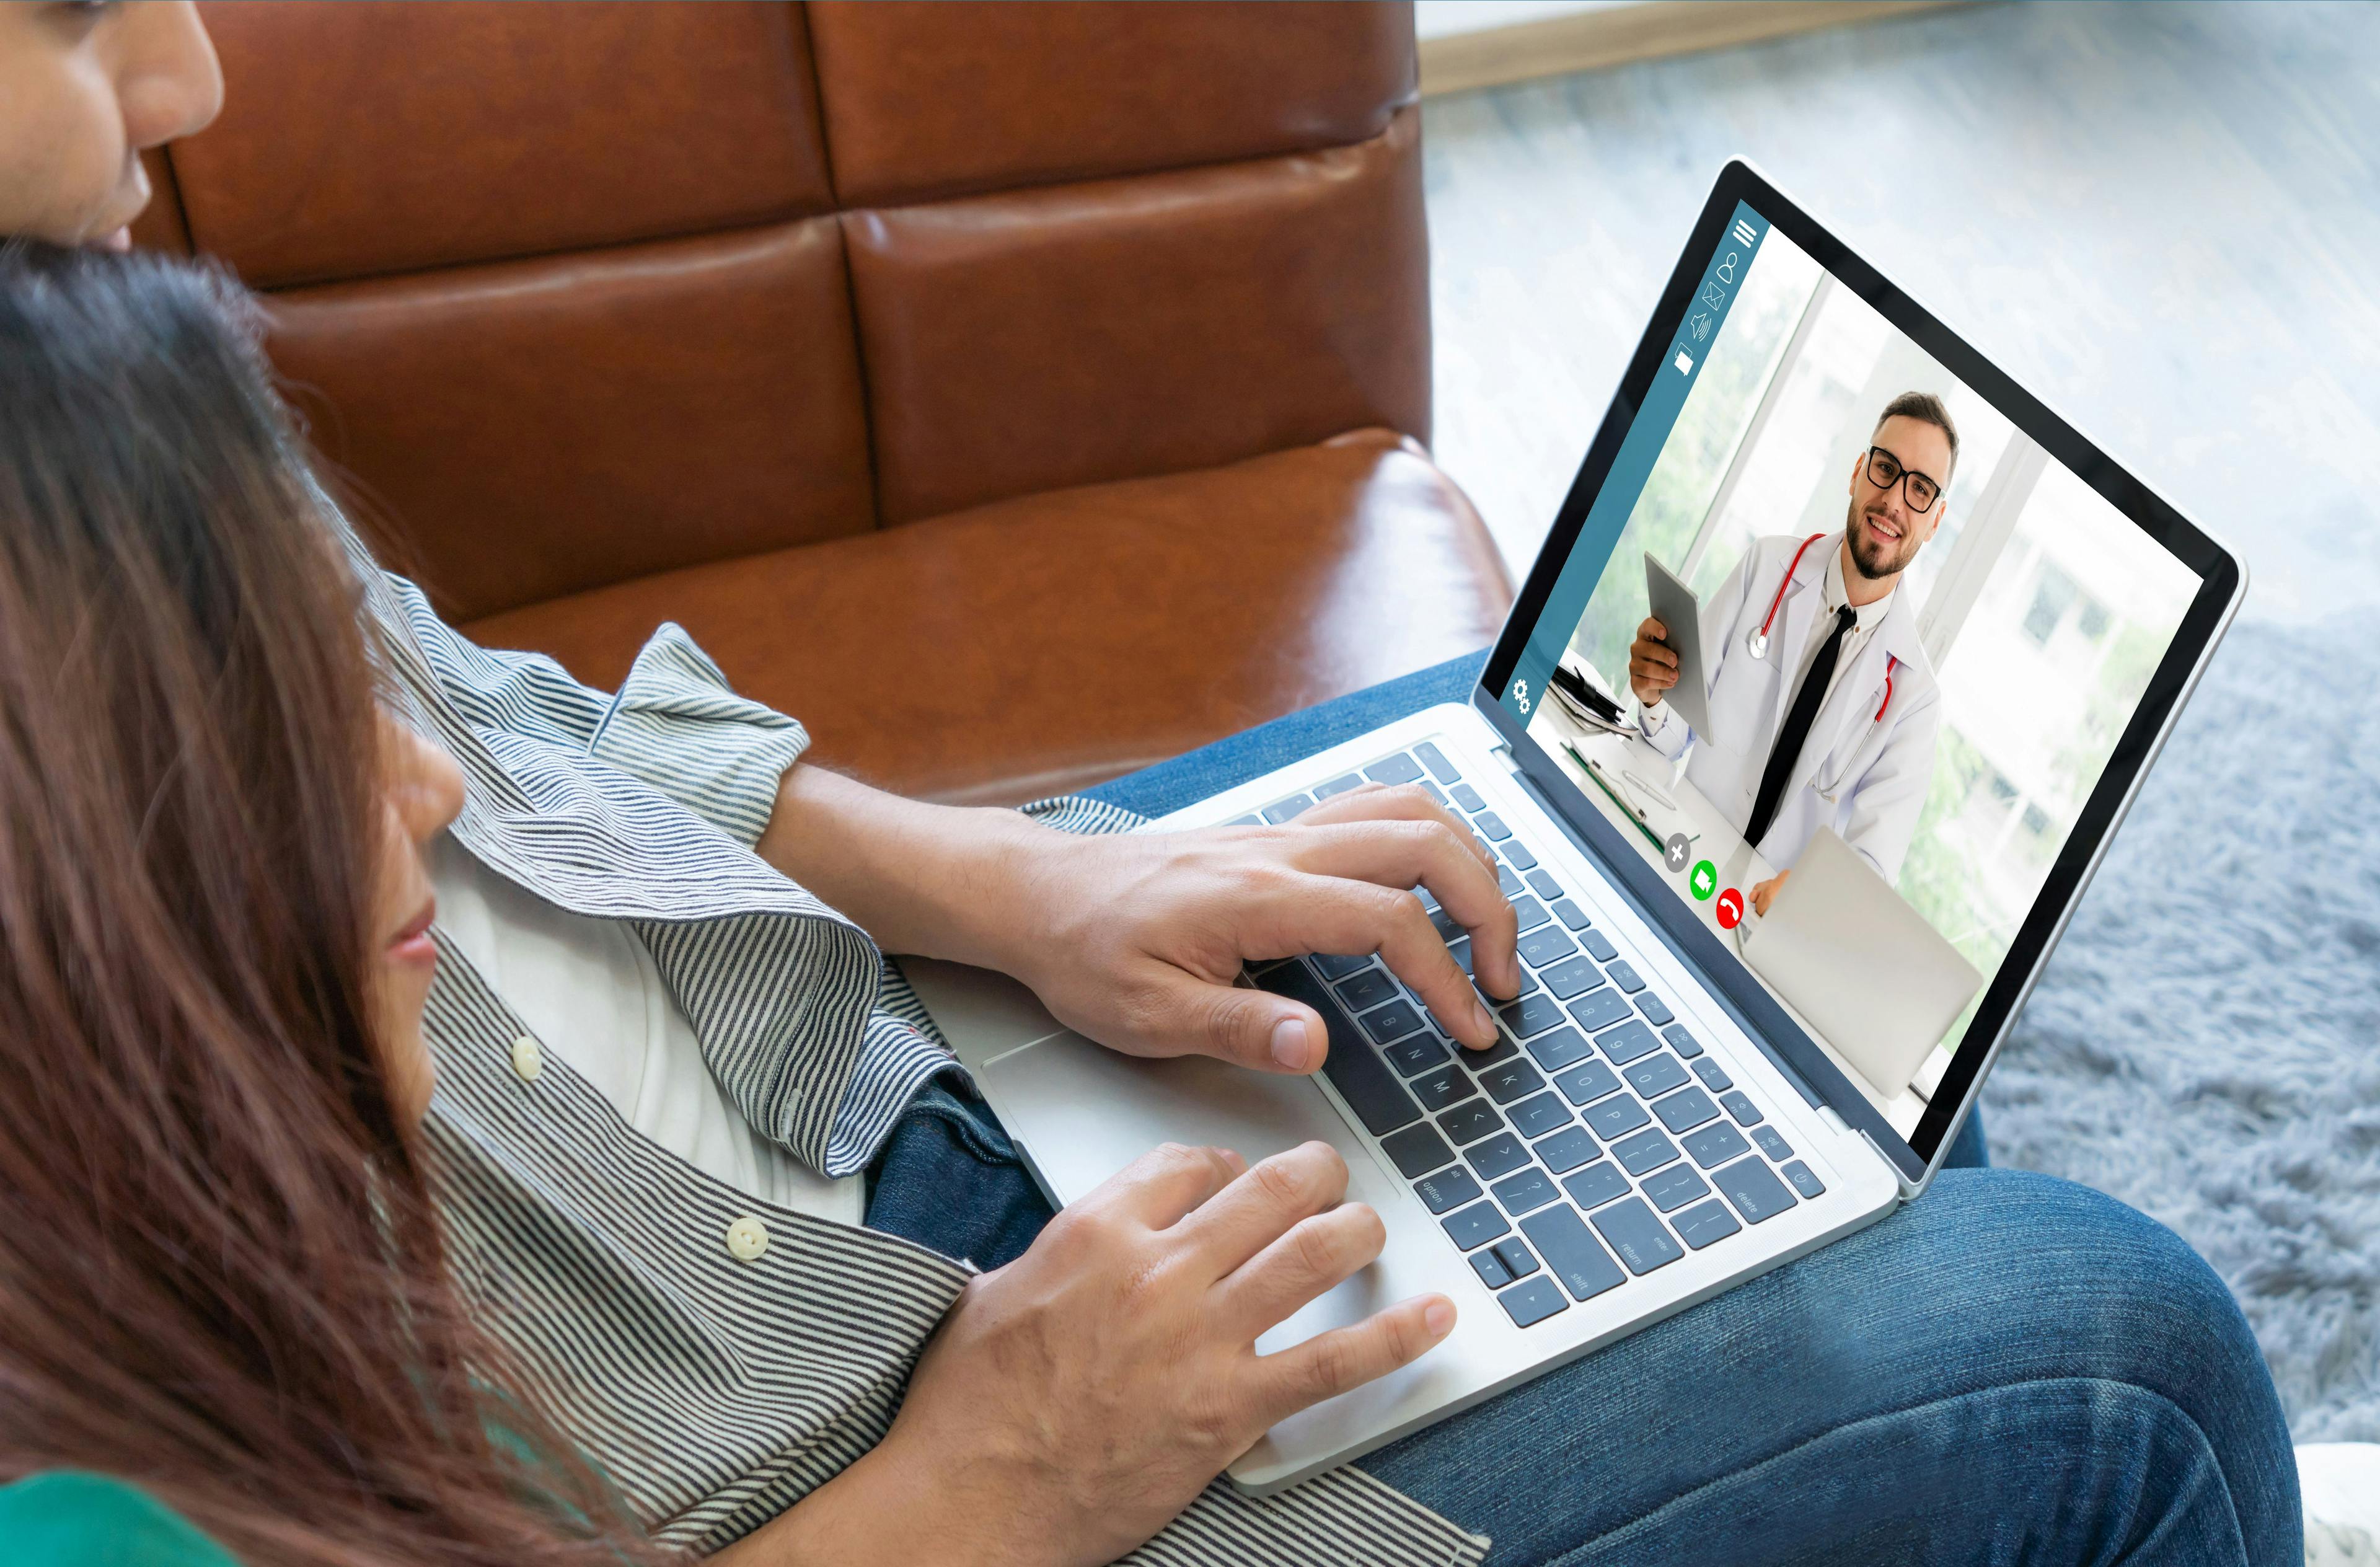 Most doctors welcome telehealth, but some worry about access